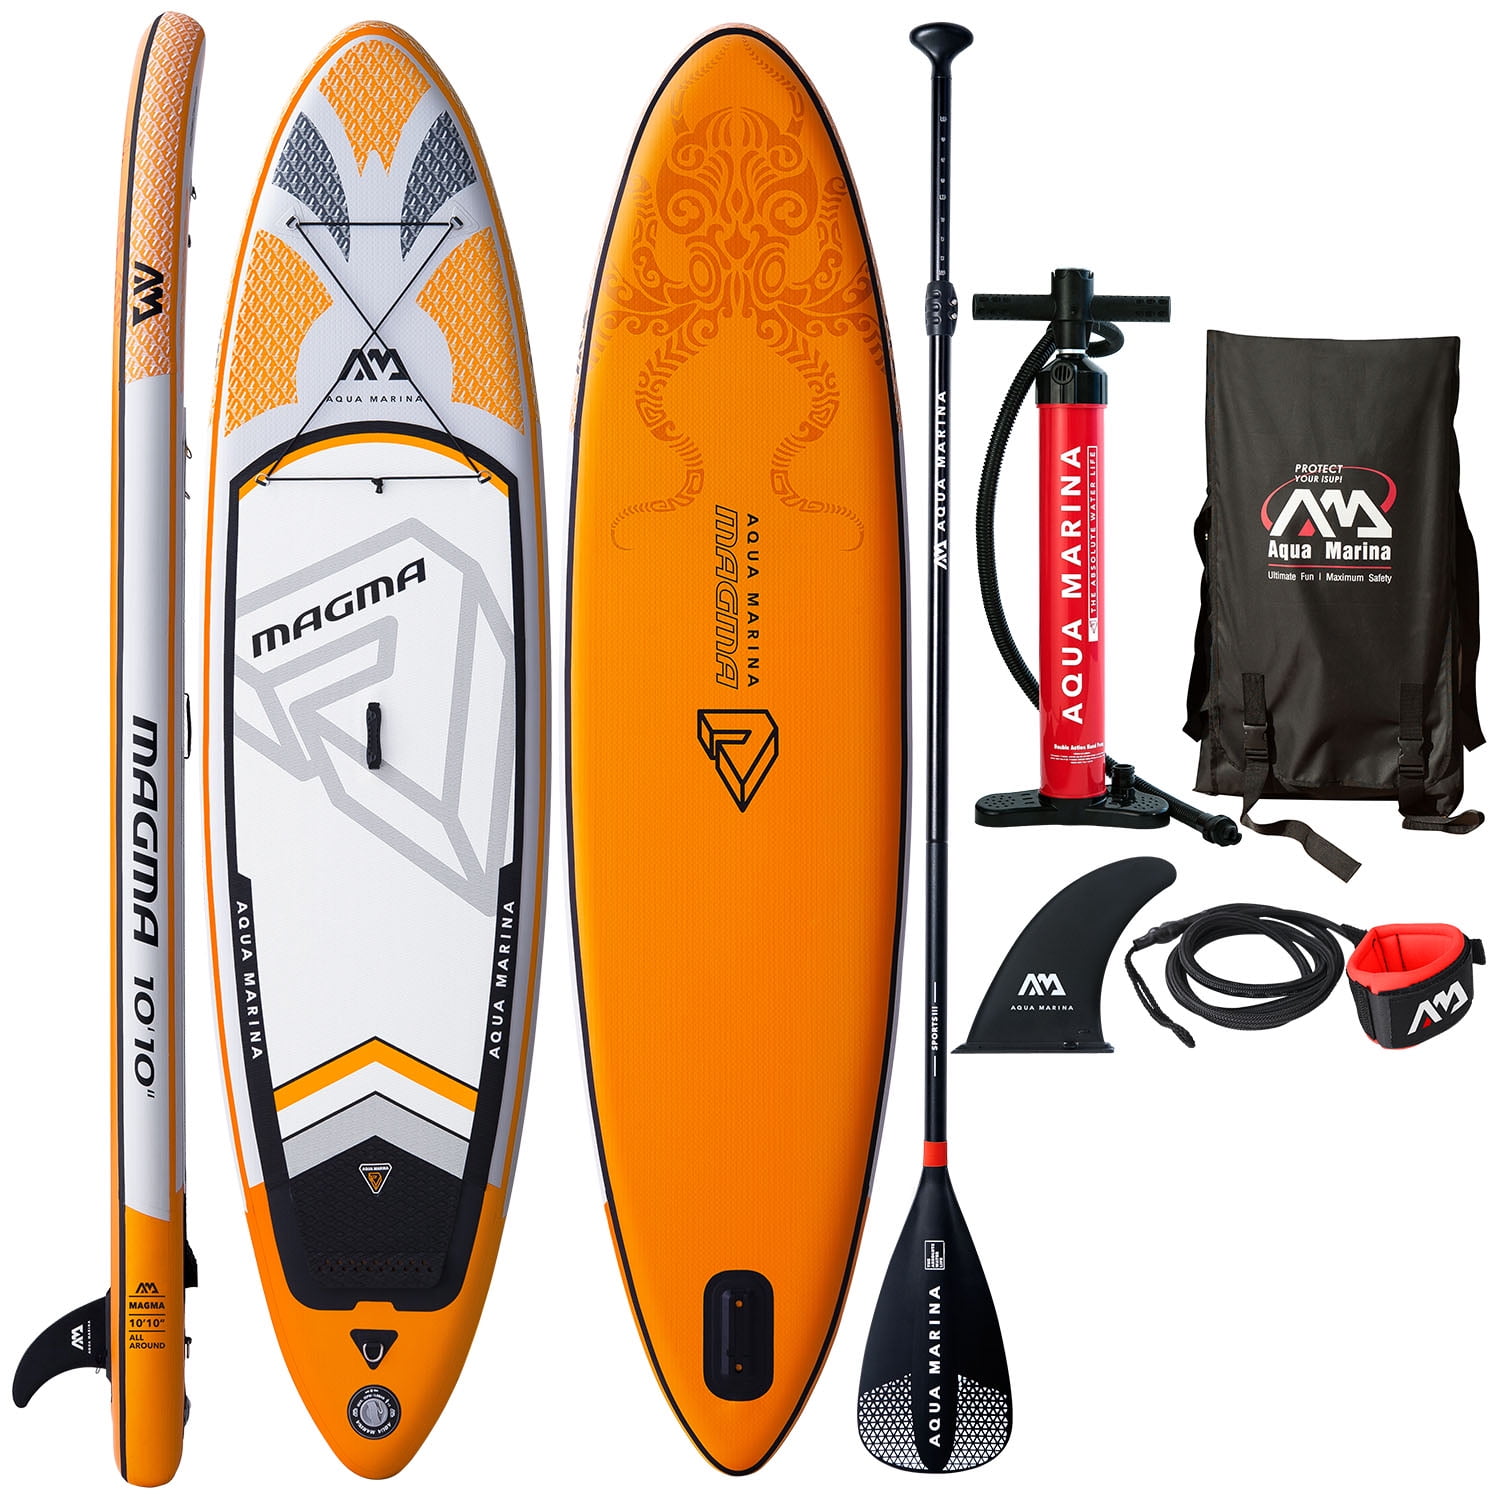 Includes Double Action Pump, MAGIC Backpack, Slide-in Center Fin ...